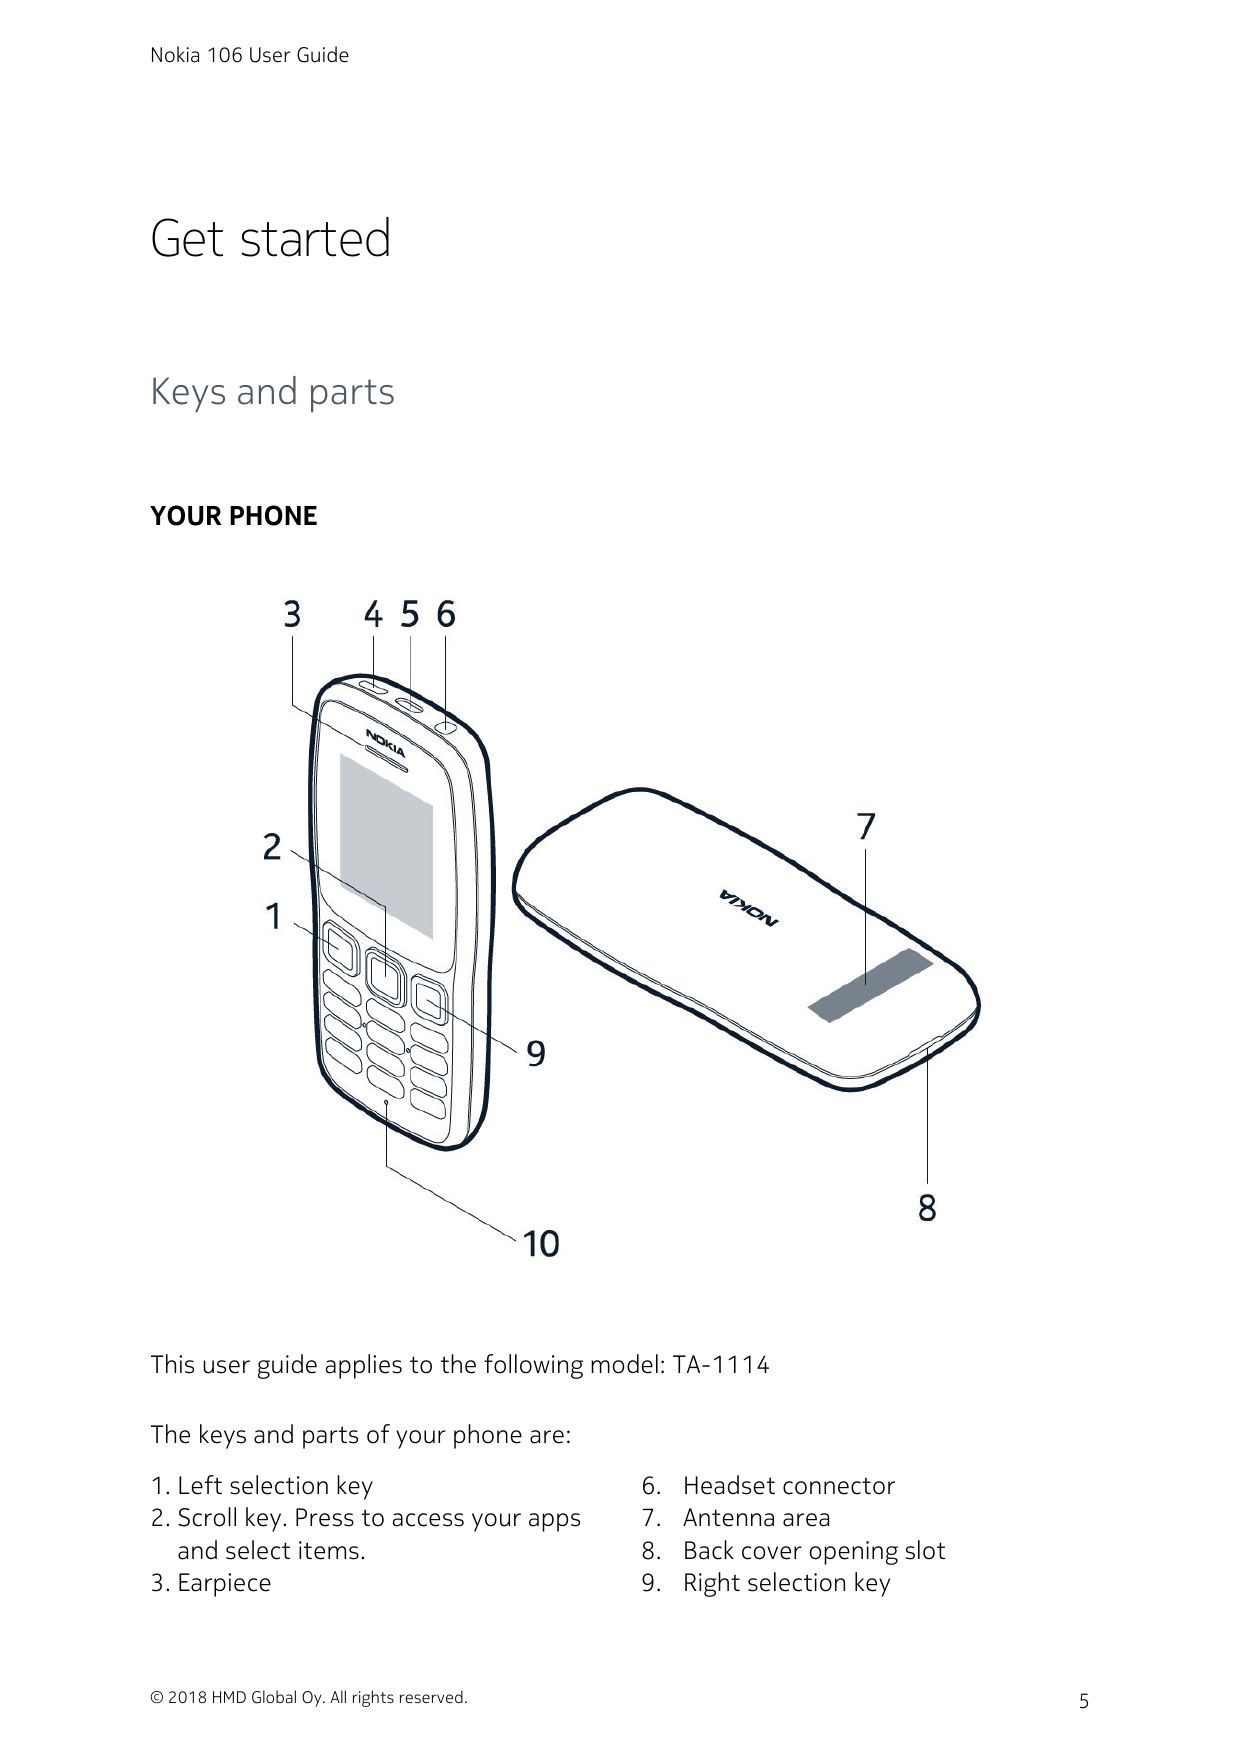 Nokia 106 User GuideGet startedKeys and partsYOUR PHONEThis user guide applies to the following model: TA-1114The keys and parts